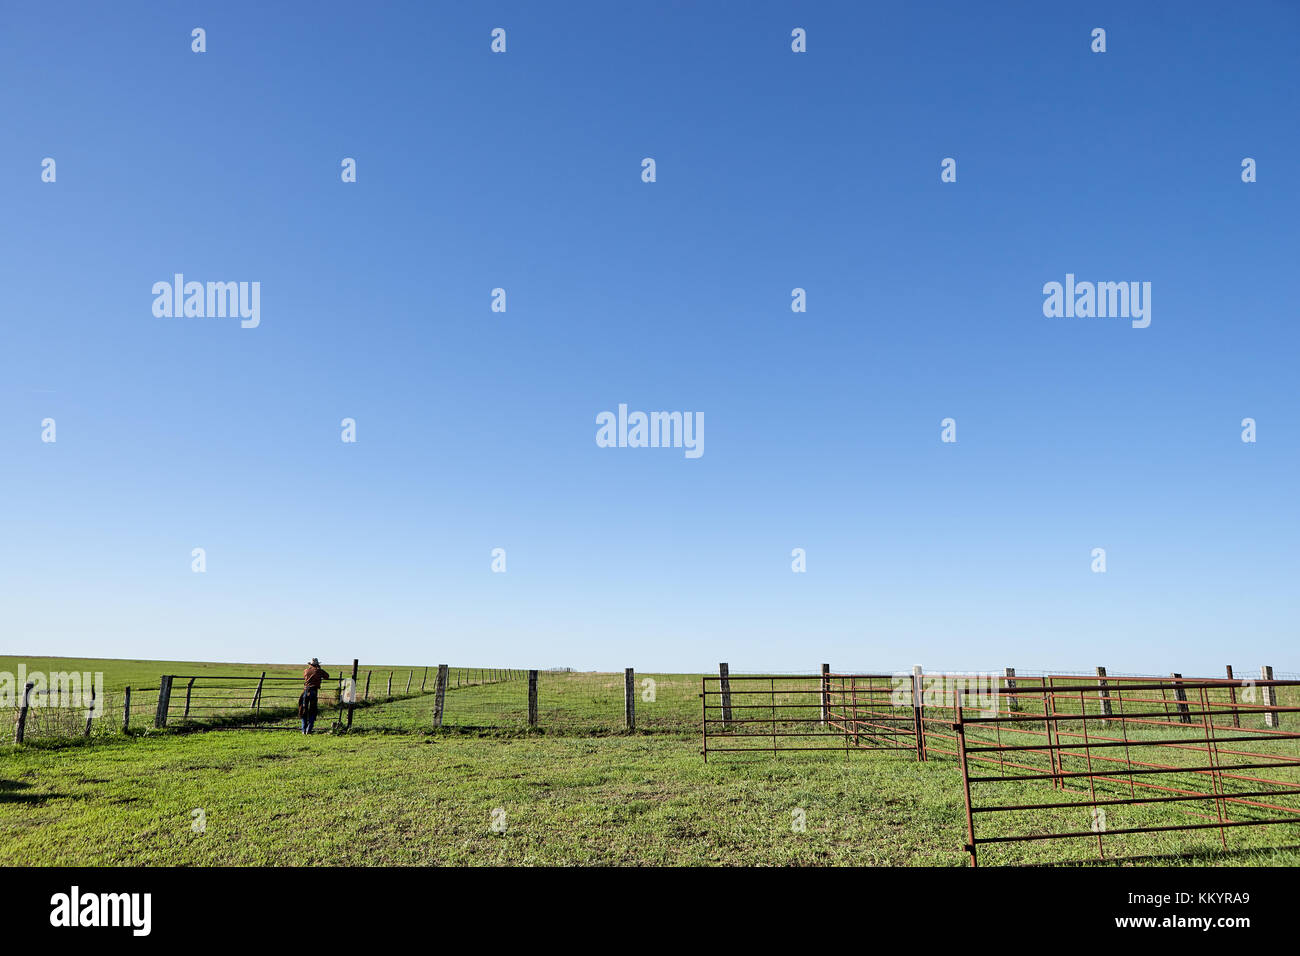 Empty fenced grassy green livestock pastures with open gates in a rural landscape of flat open farmland Stock Photo